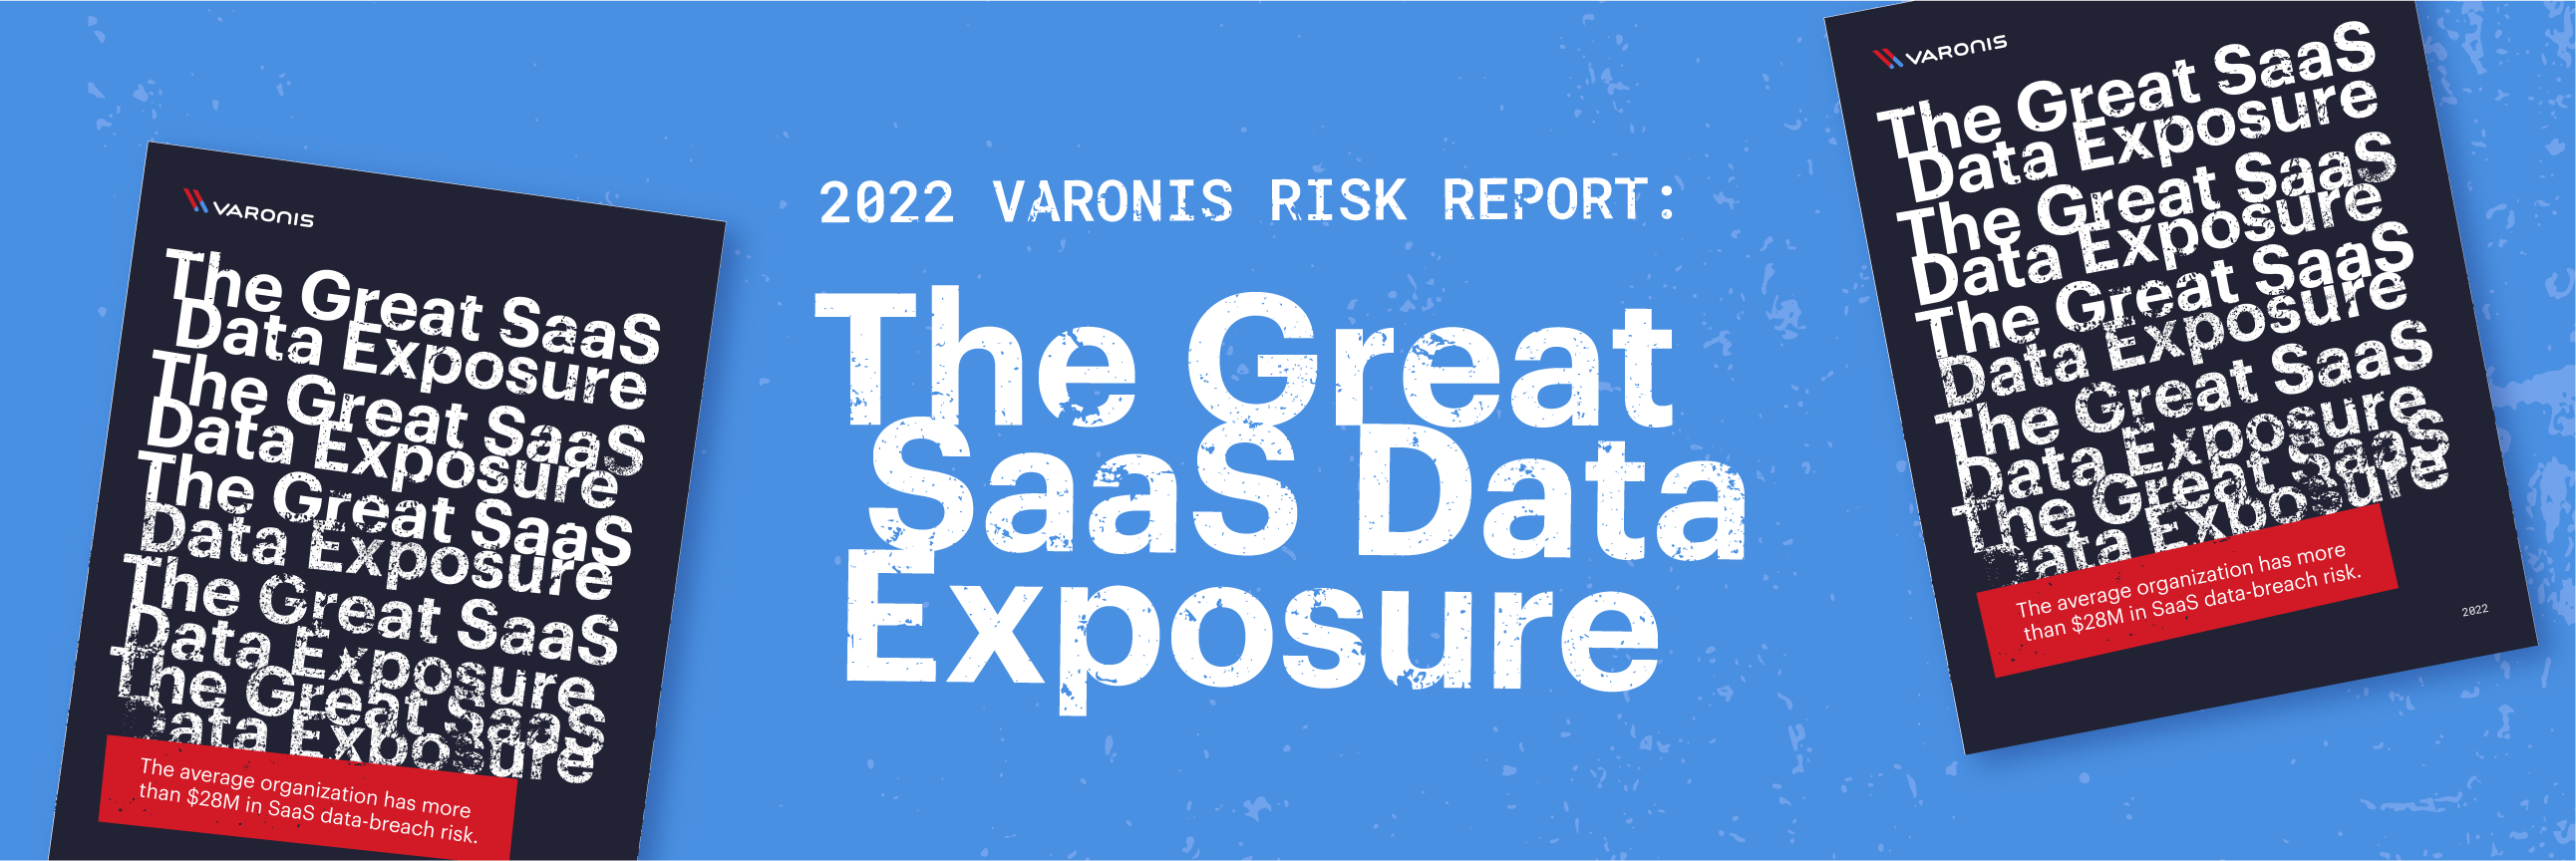 SaaS Risk Report Reveals Exposed Cloud Data is a $28M Risk for Typical Company